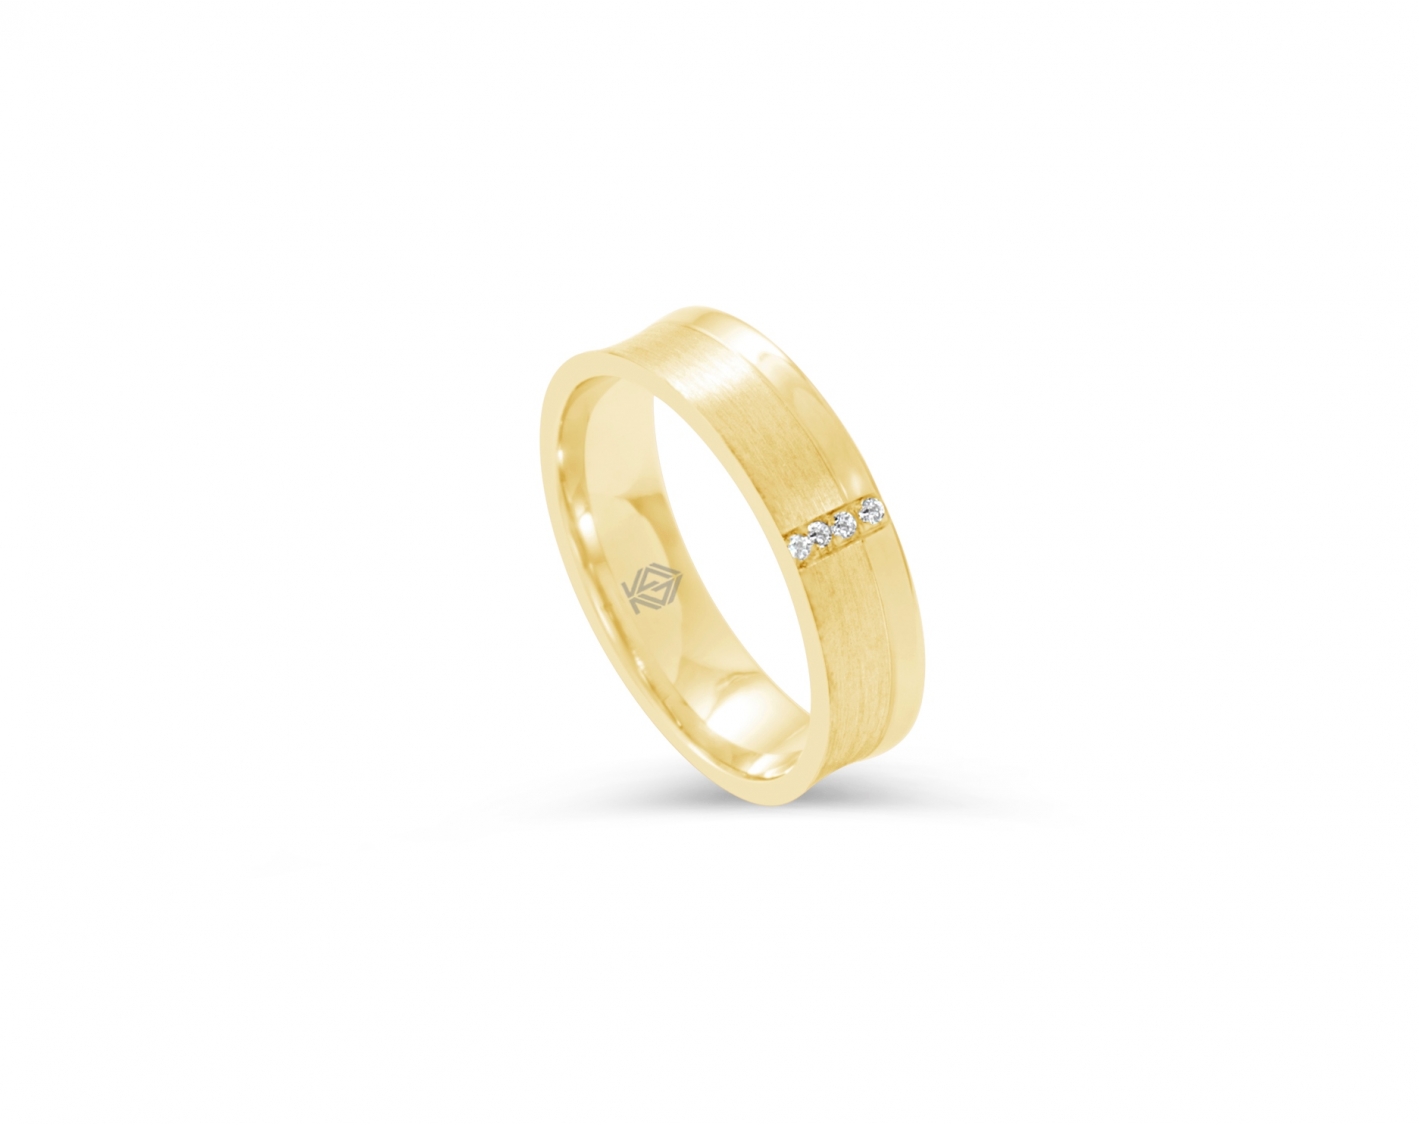 18k rose gold 5mm matte wedding ring with a vertical line of four diamonds Photos & images